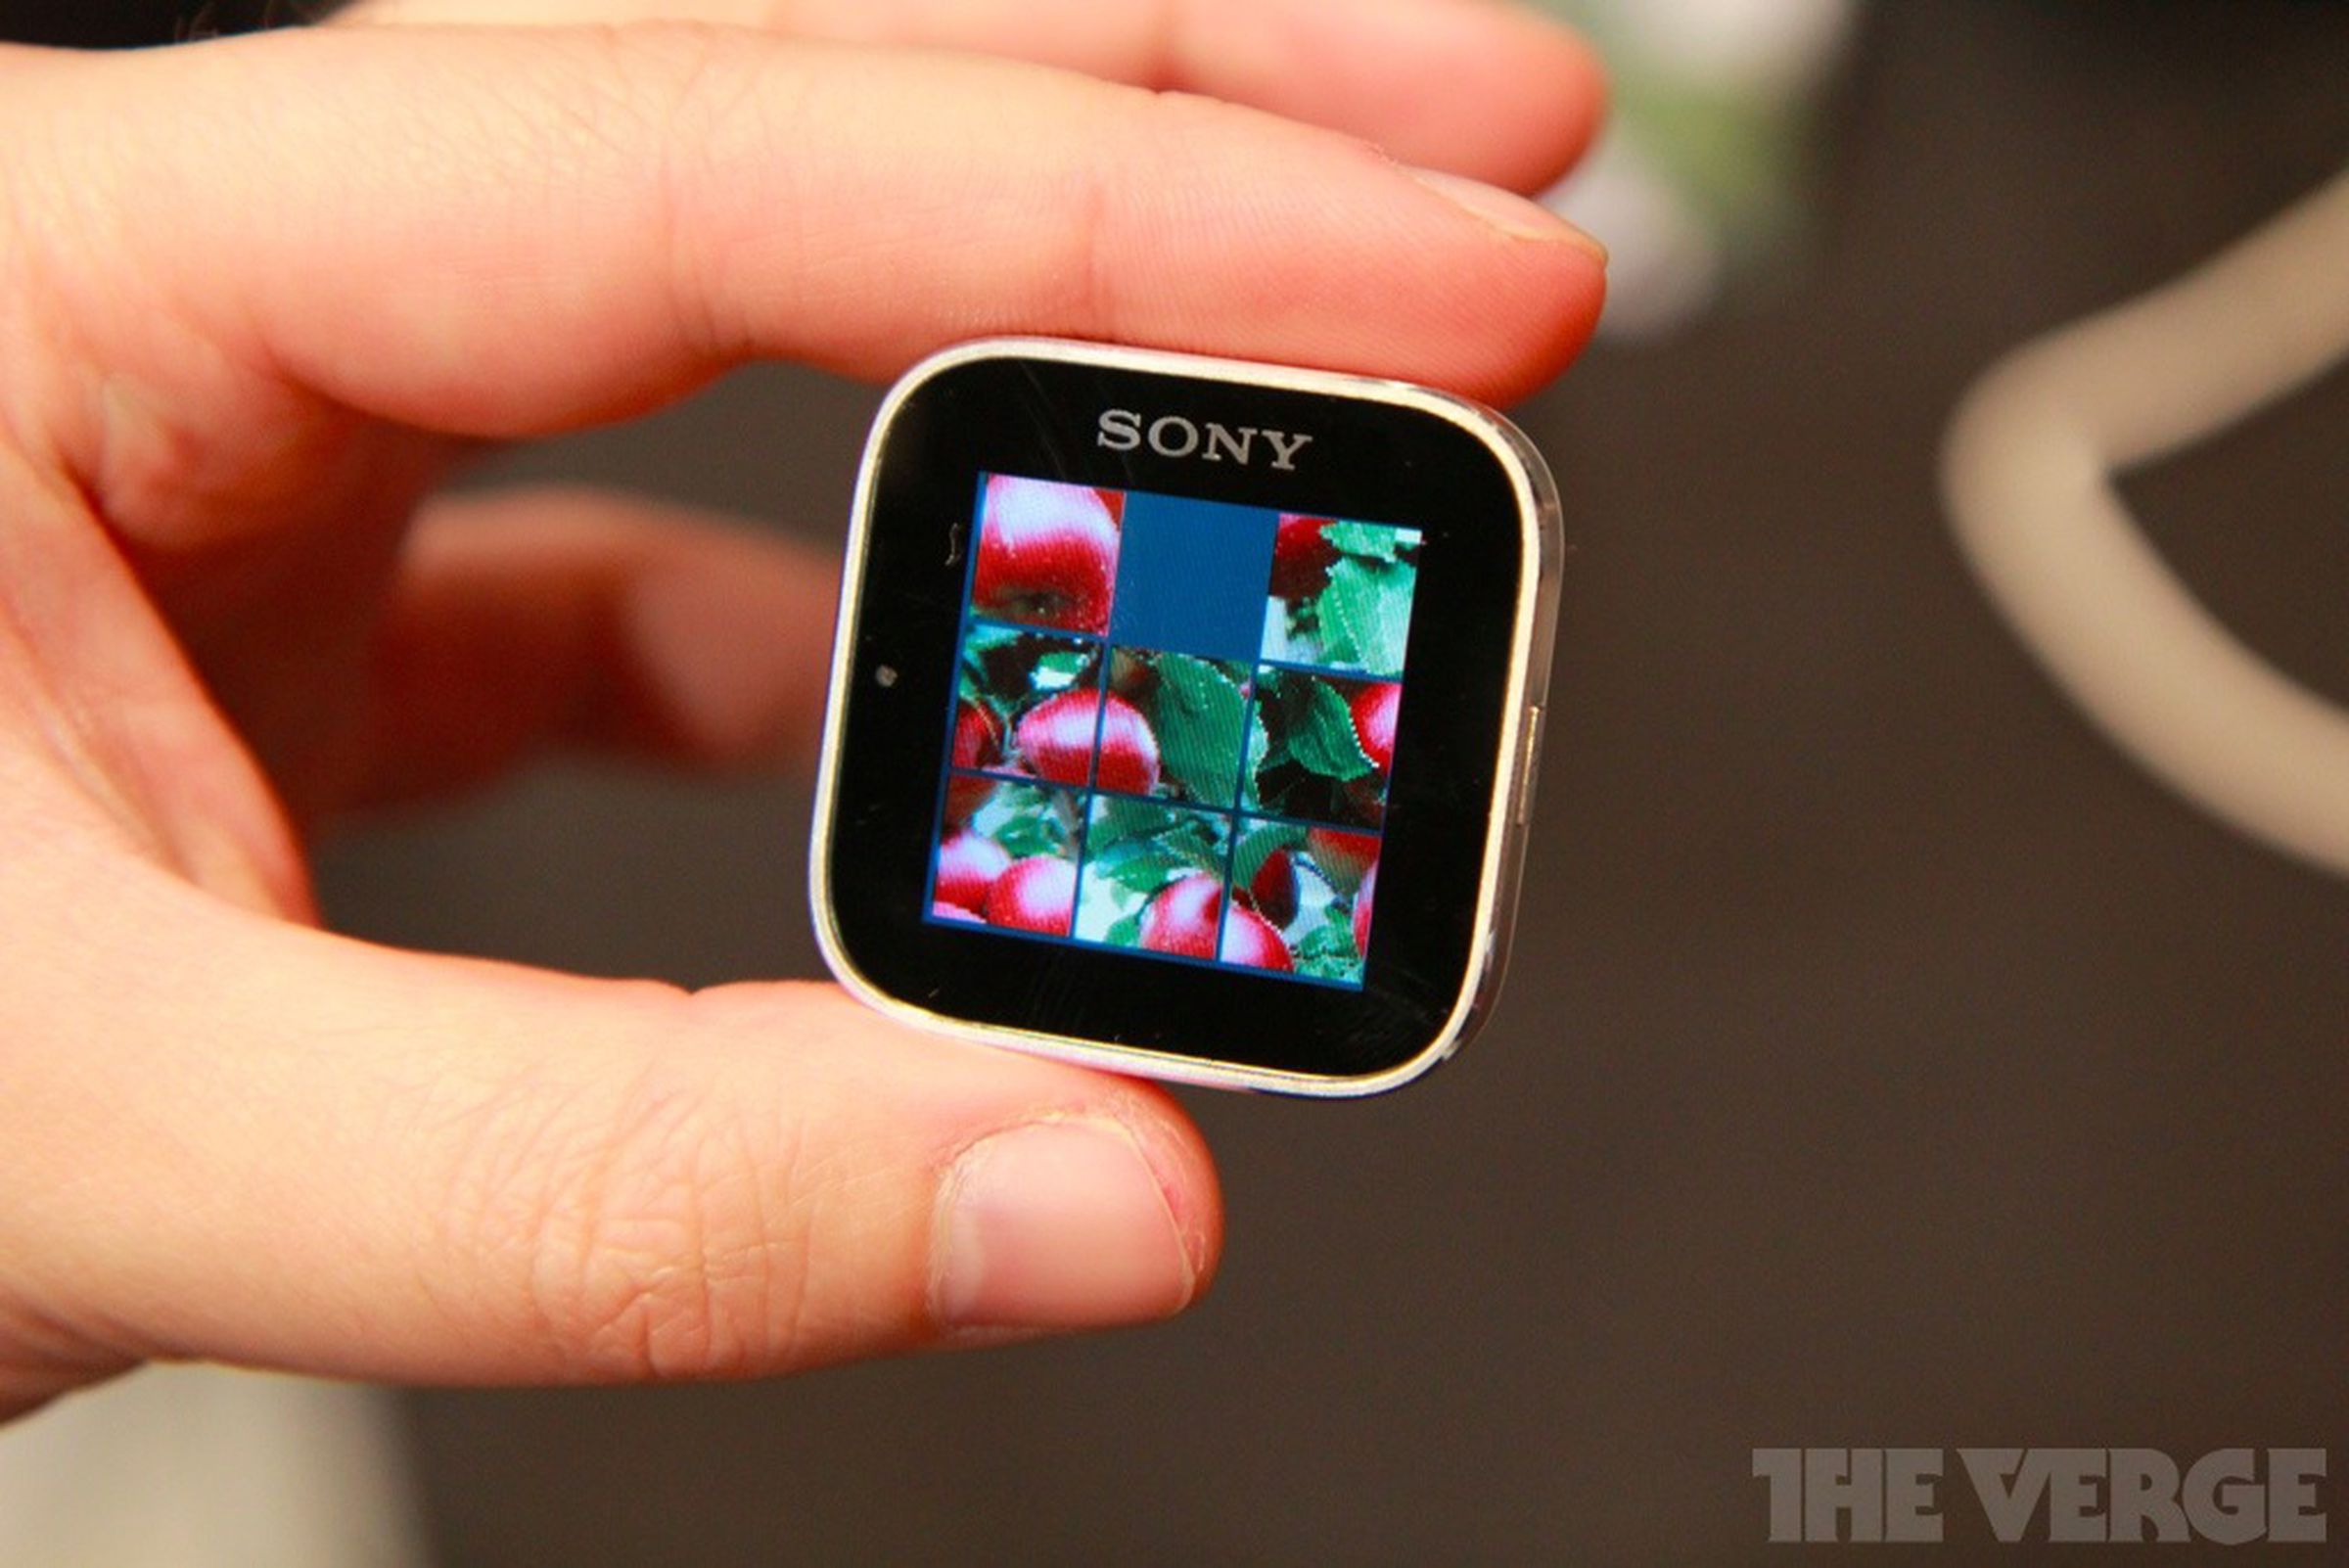 Sony Smart Watch (aka Sony Ericsson LiveView 2) hands-on pictures